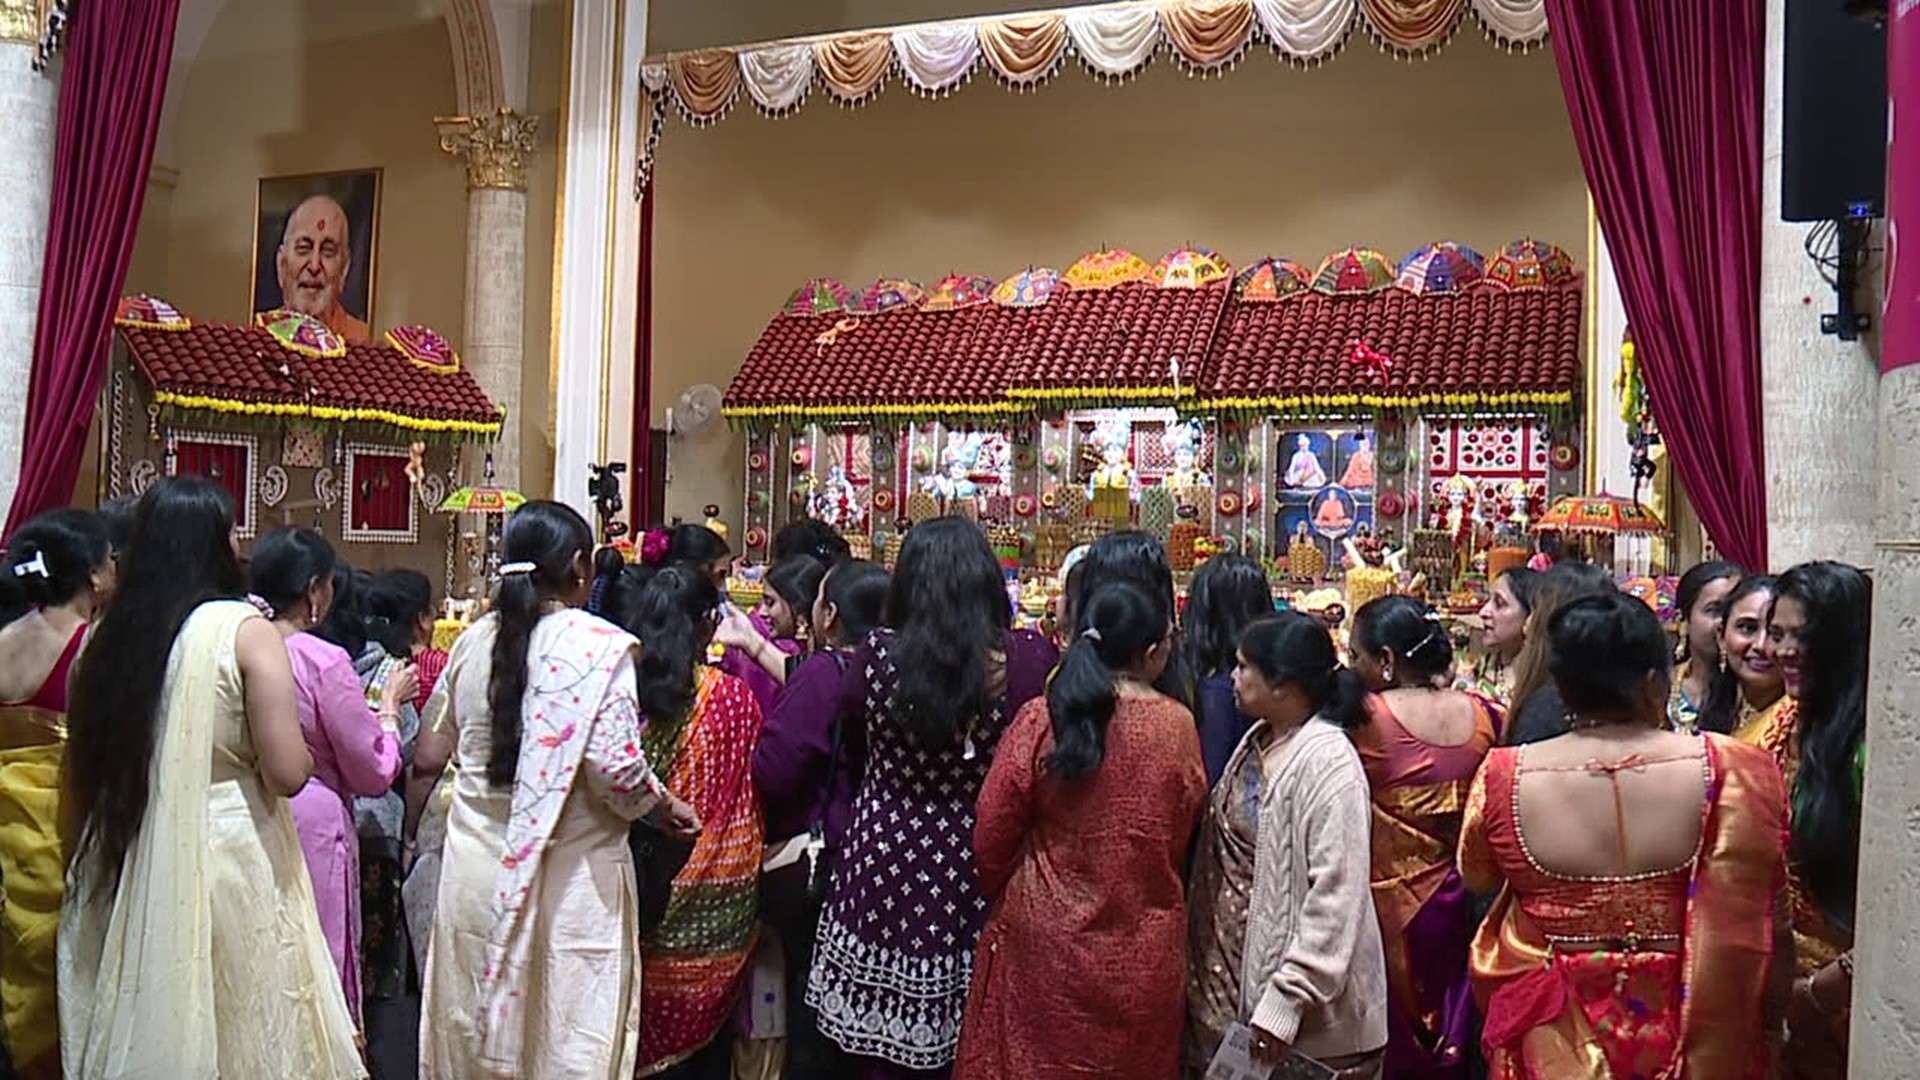 Many people gathered in Scranton to celebrate a major holiday at the BAPS Hindu Temple.